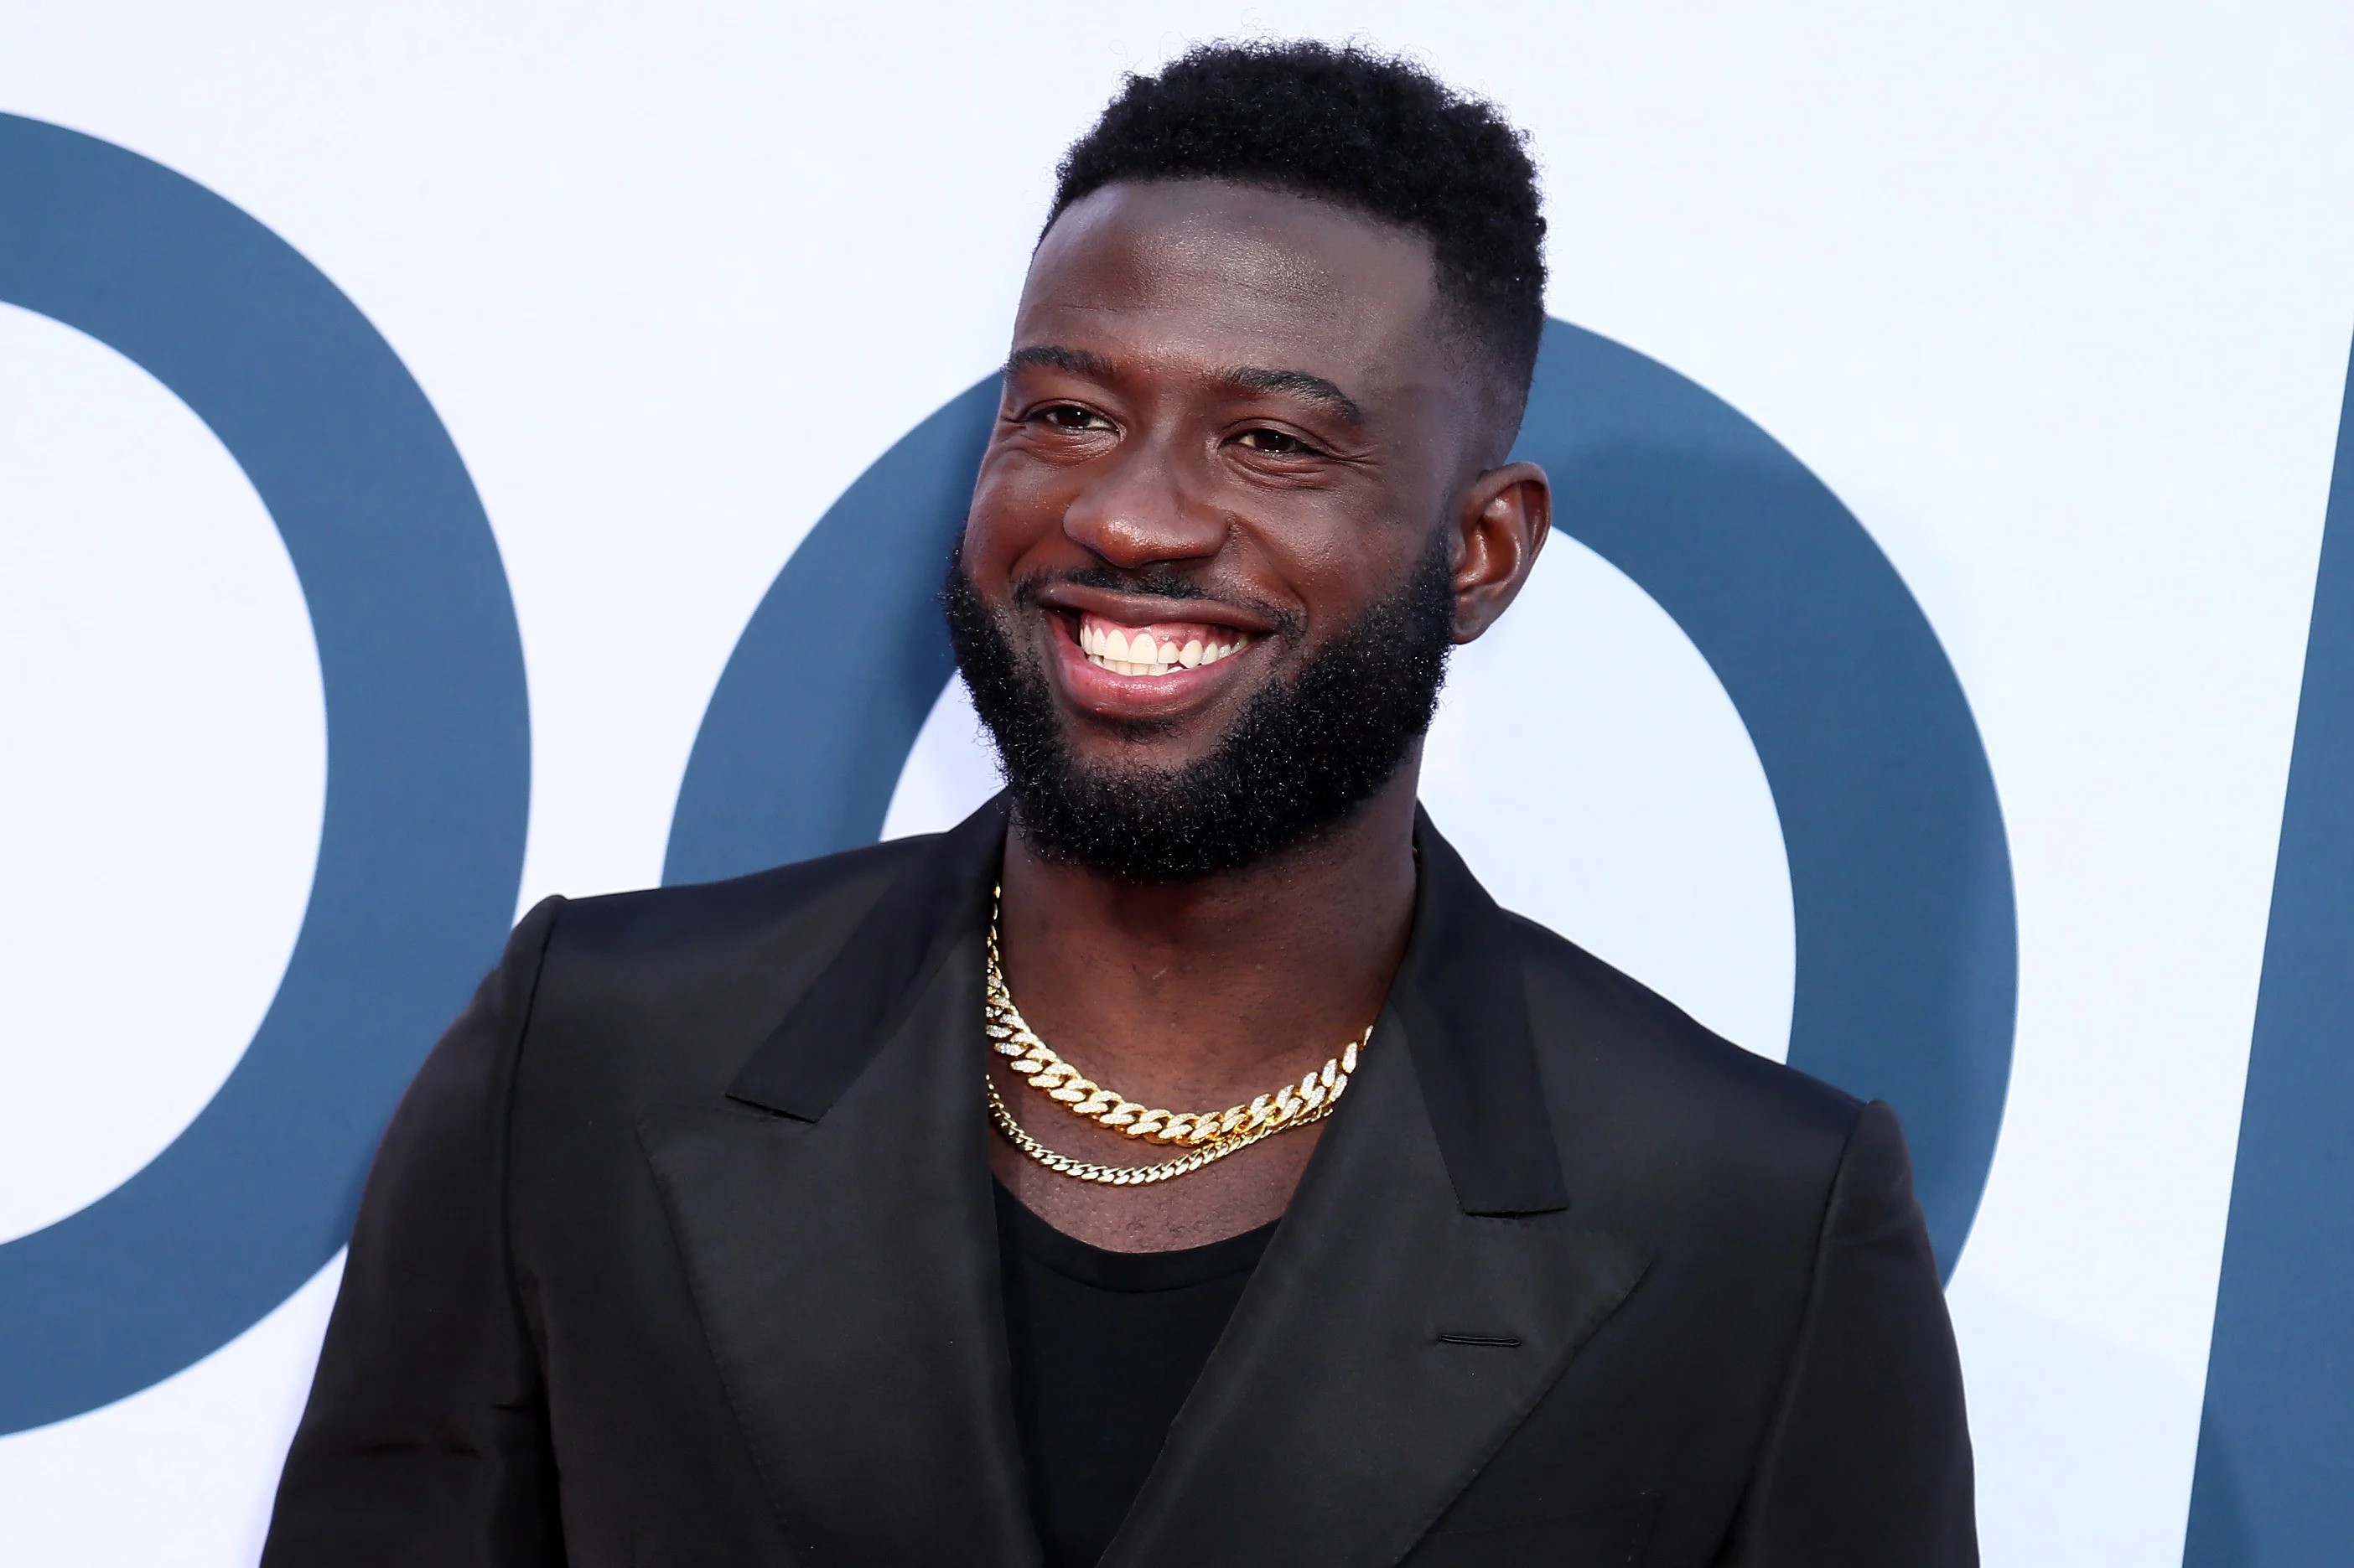 Sinqua Walls wearing a black suit at an event